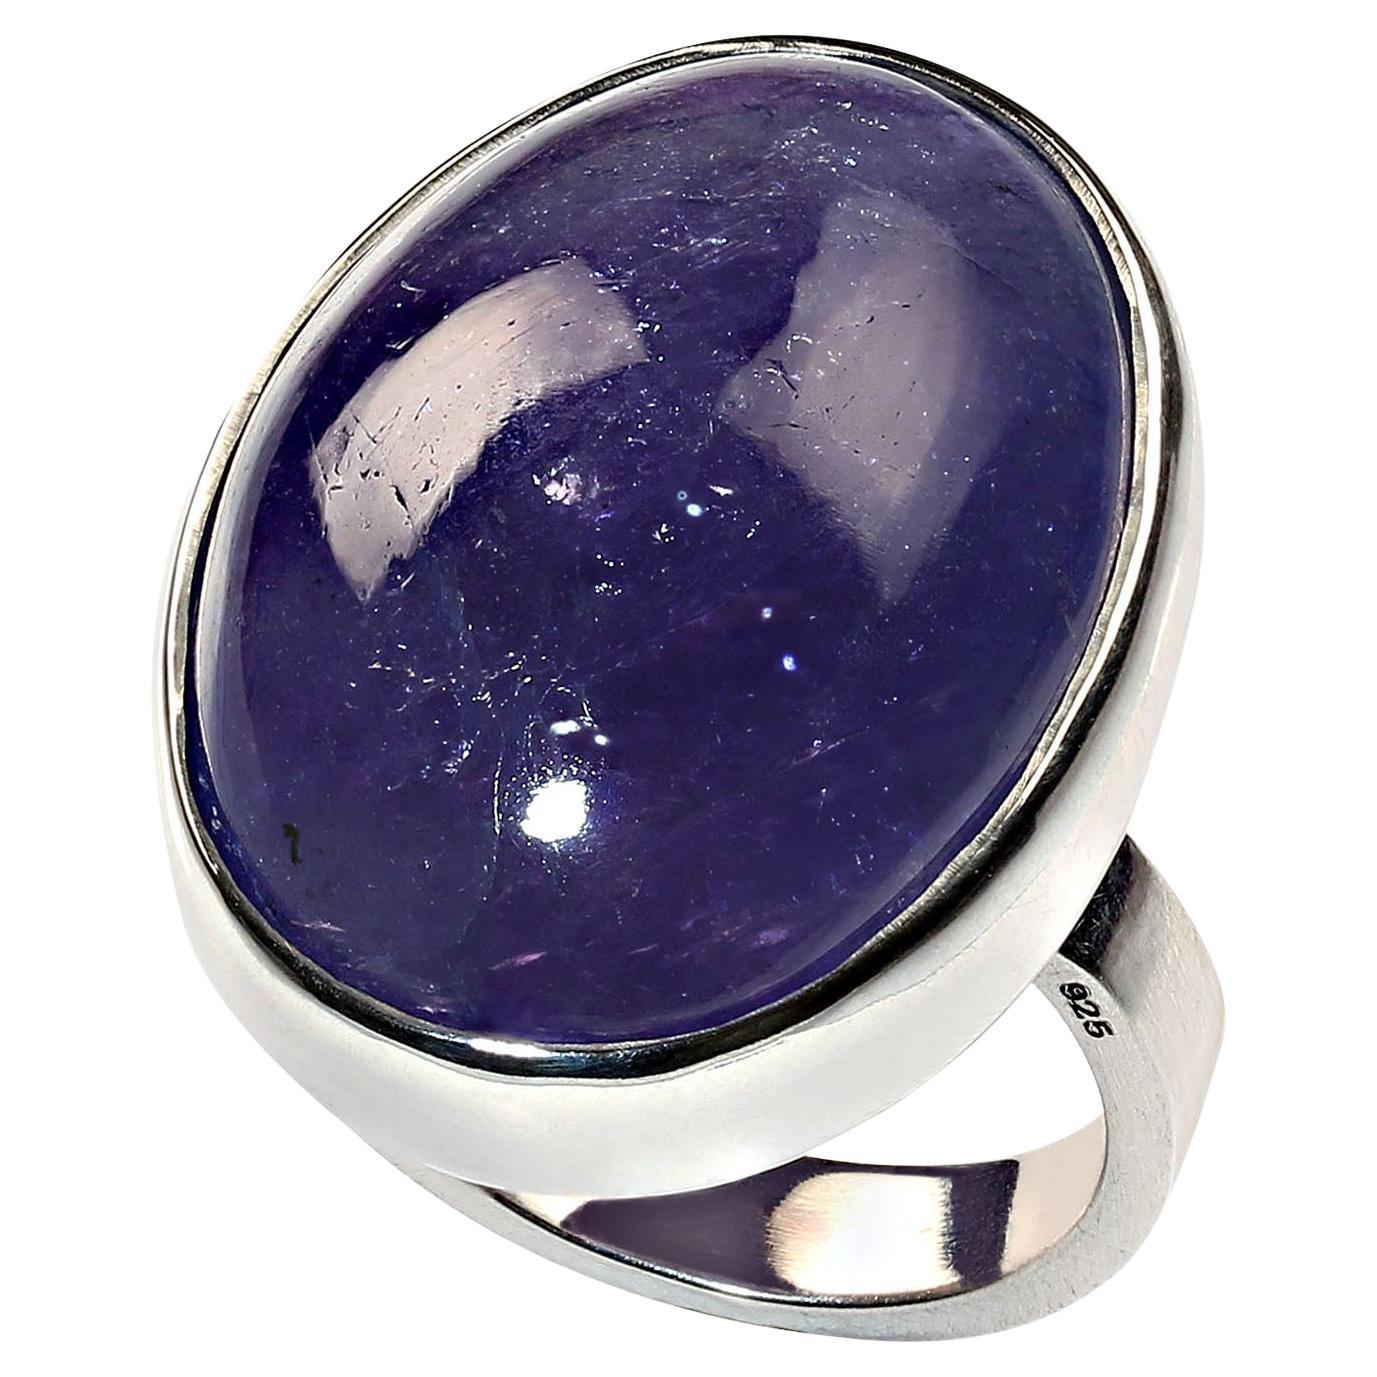 Terrific Tanzanite in a handmade Sterling Silver bezel setting.  This gorgeous 50 carat oval cabochon Tanzanite is a real beauty. It is elegantly displayed in a glowing Sterling Silver ring that was created by one of our favorite vendors in Belo